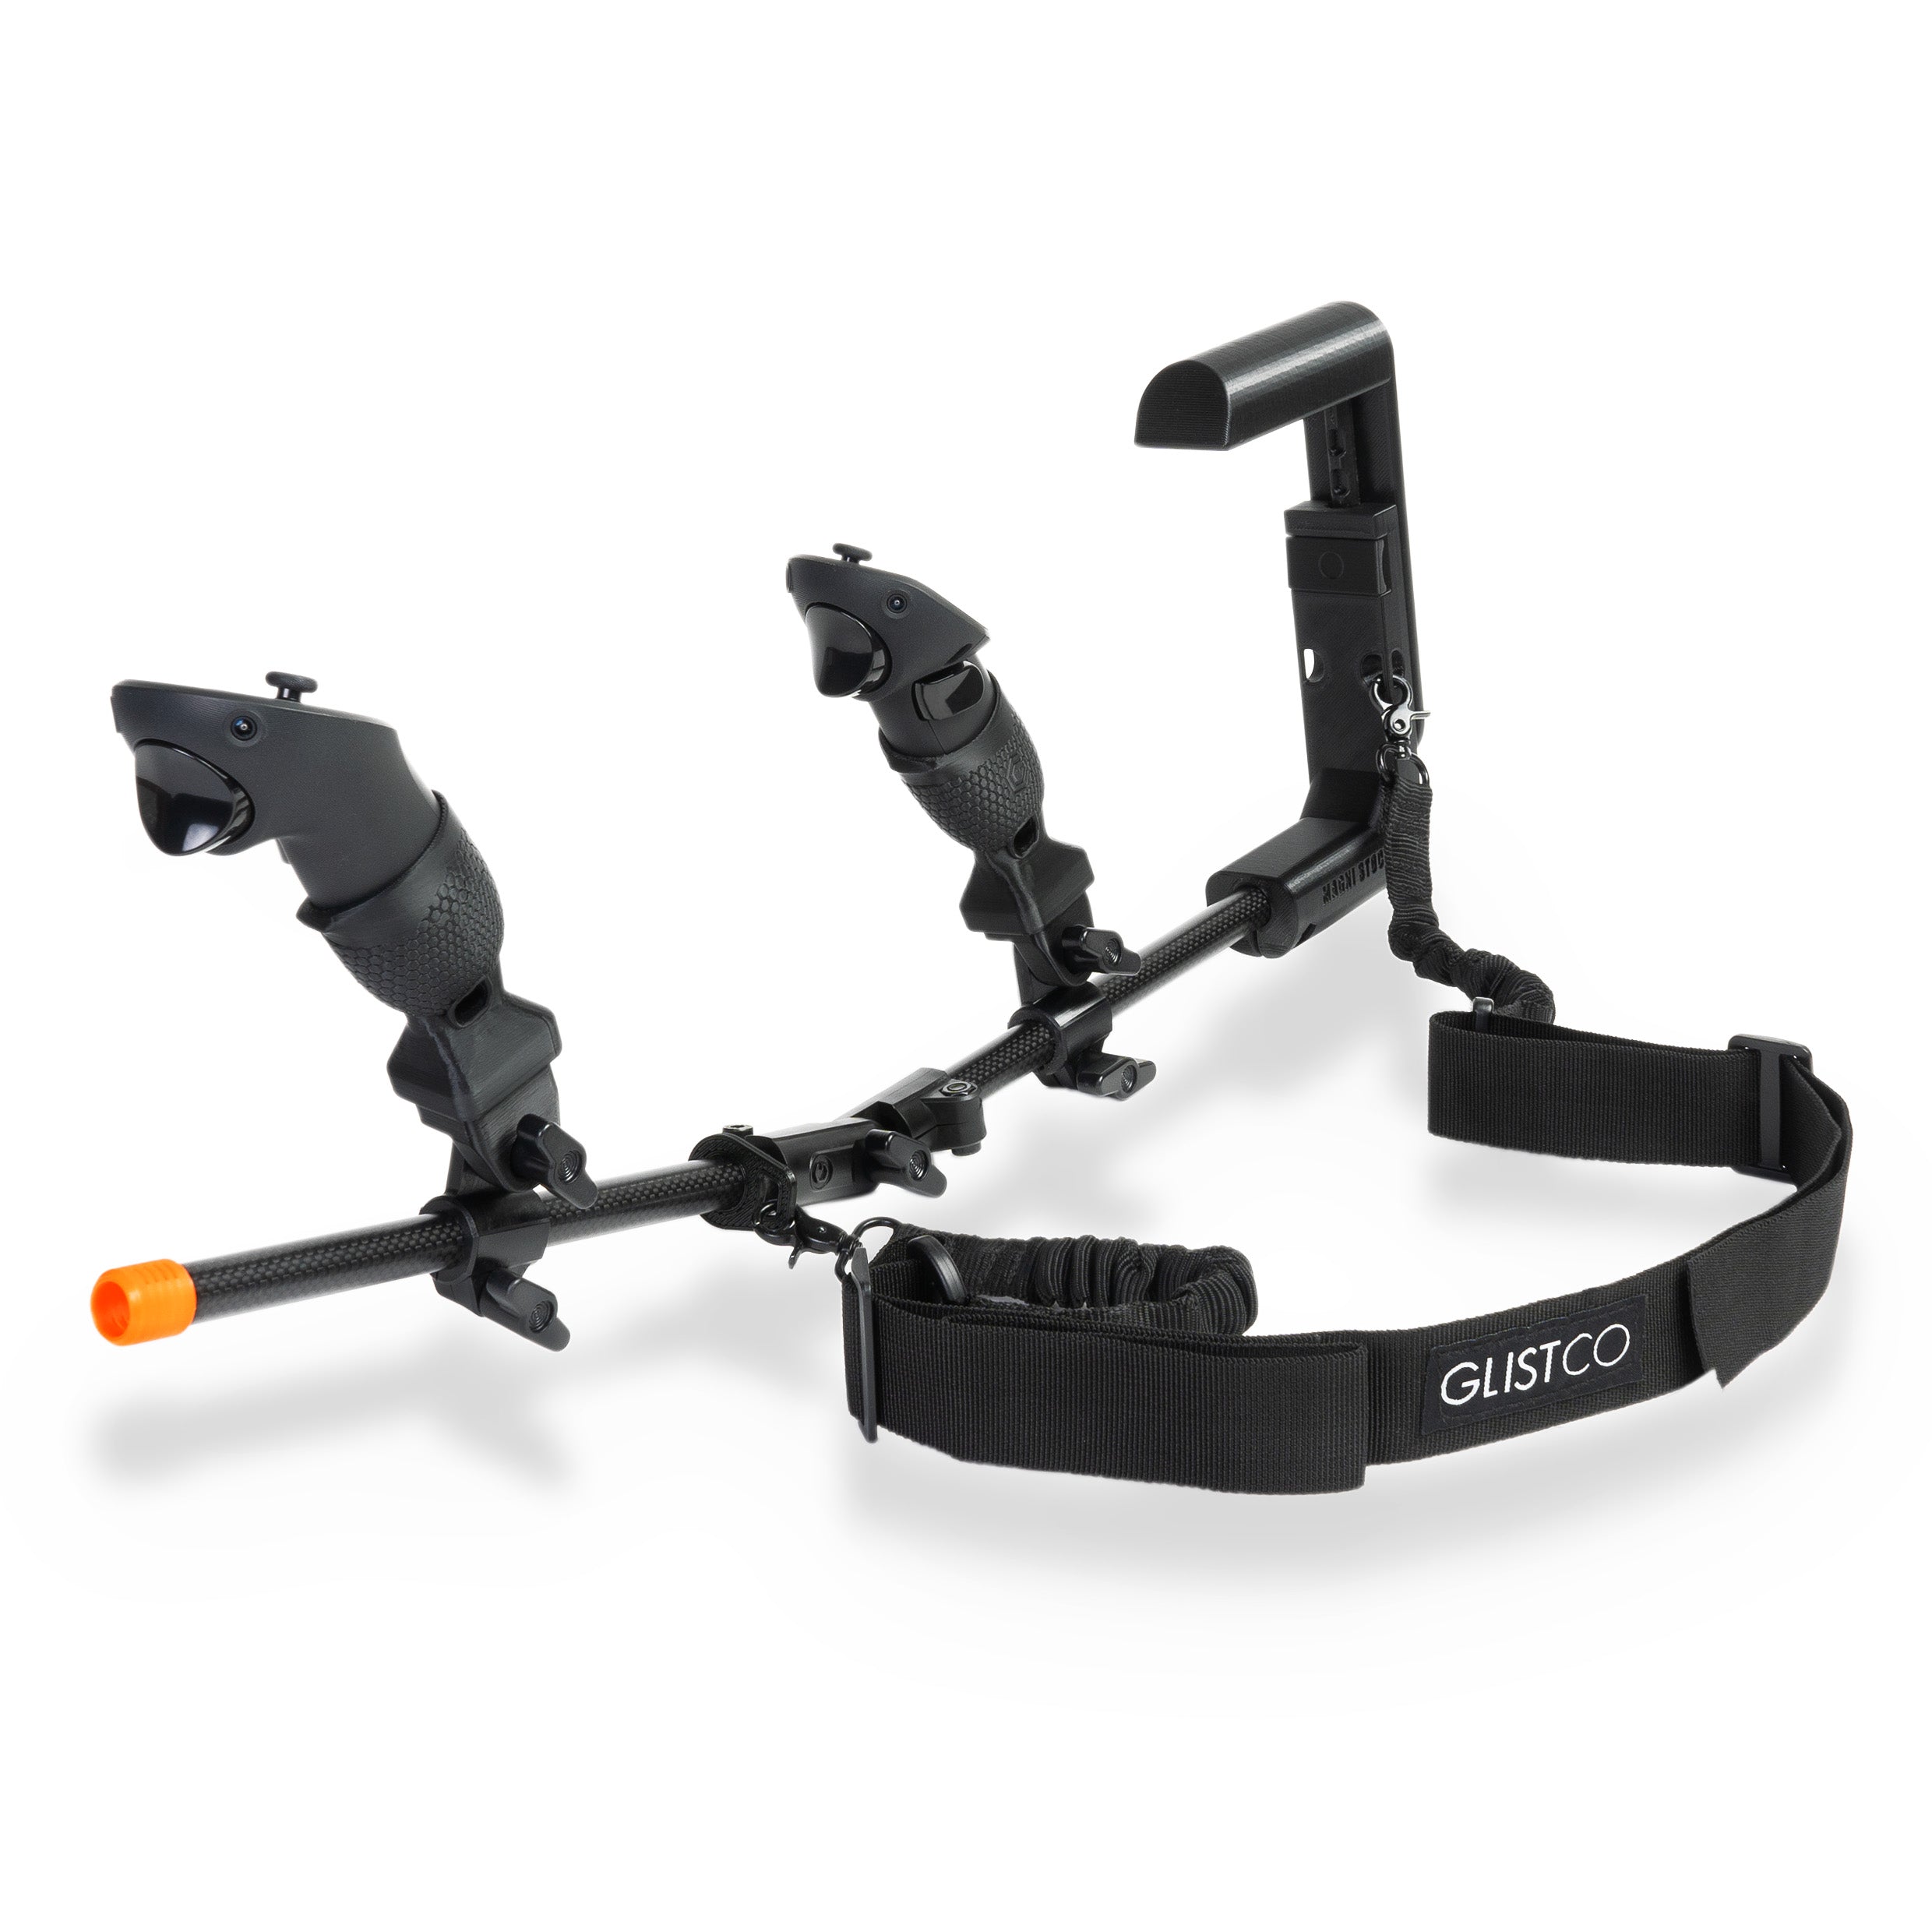 Velcro Straps - G-RIG Solid State Gimbals